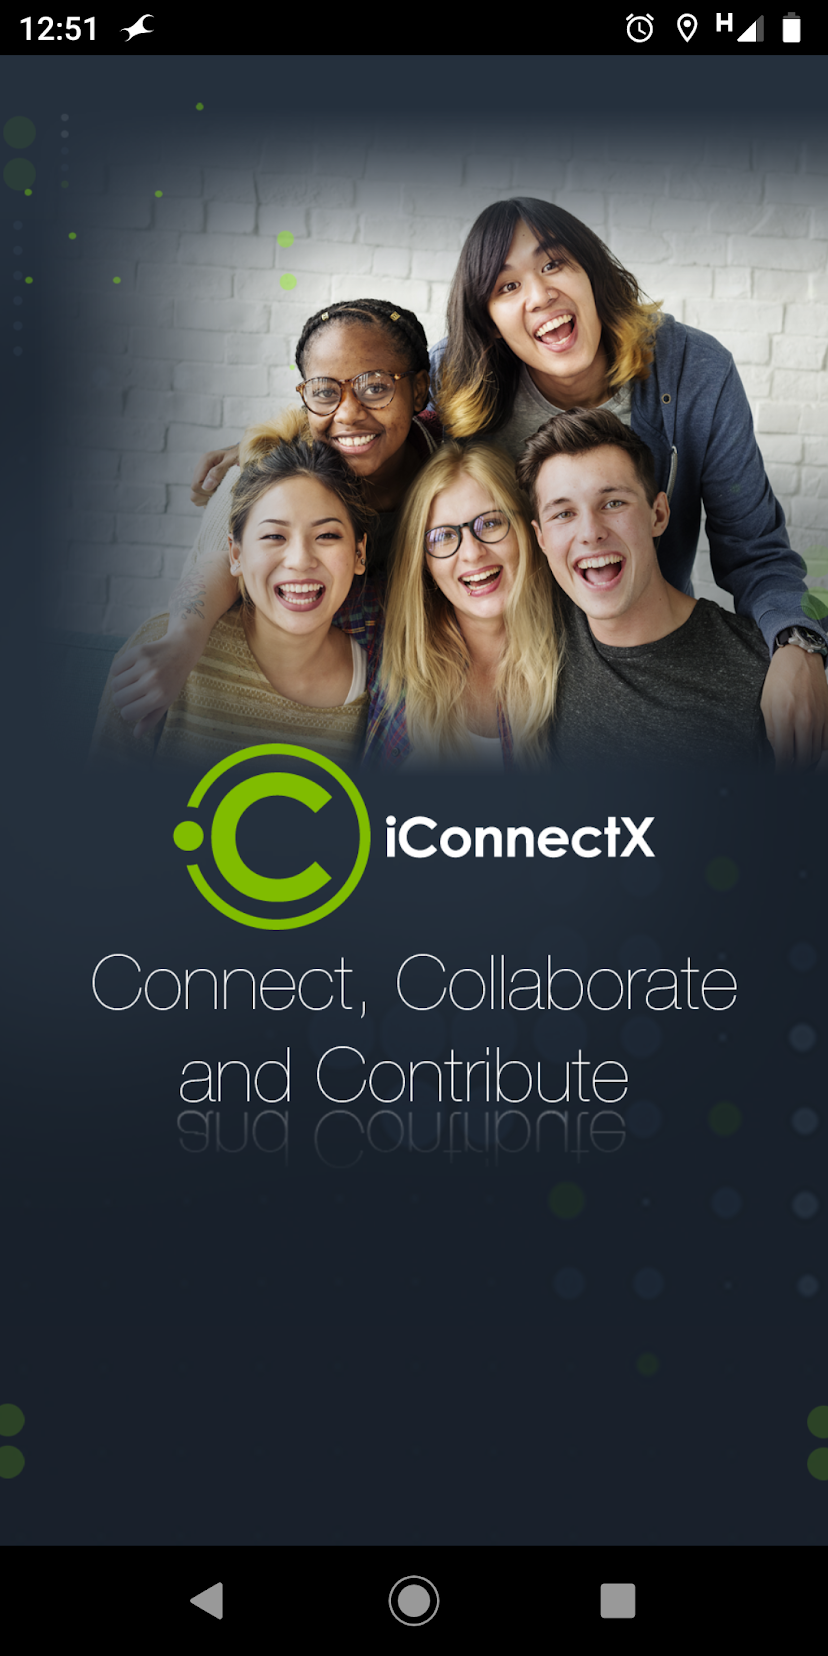 iConnectX Fundraising for Nonrpfit